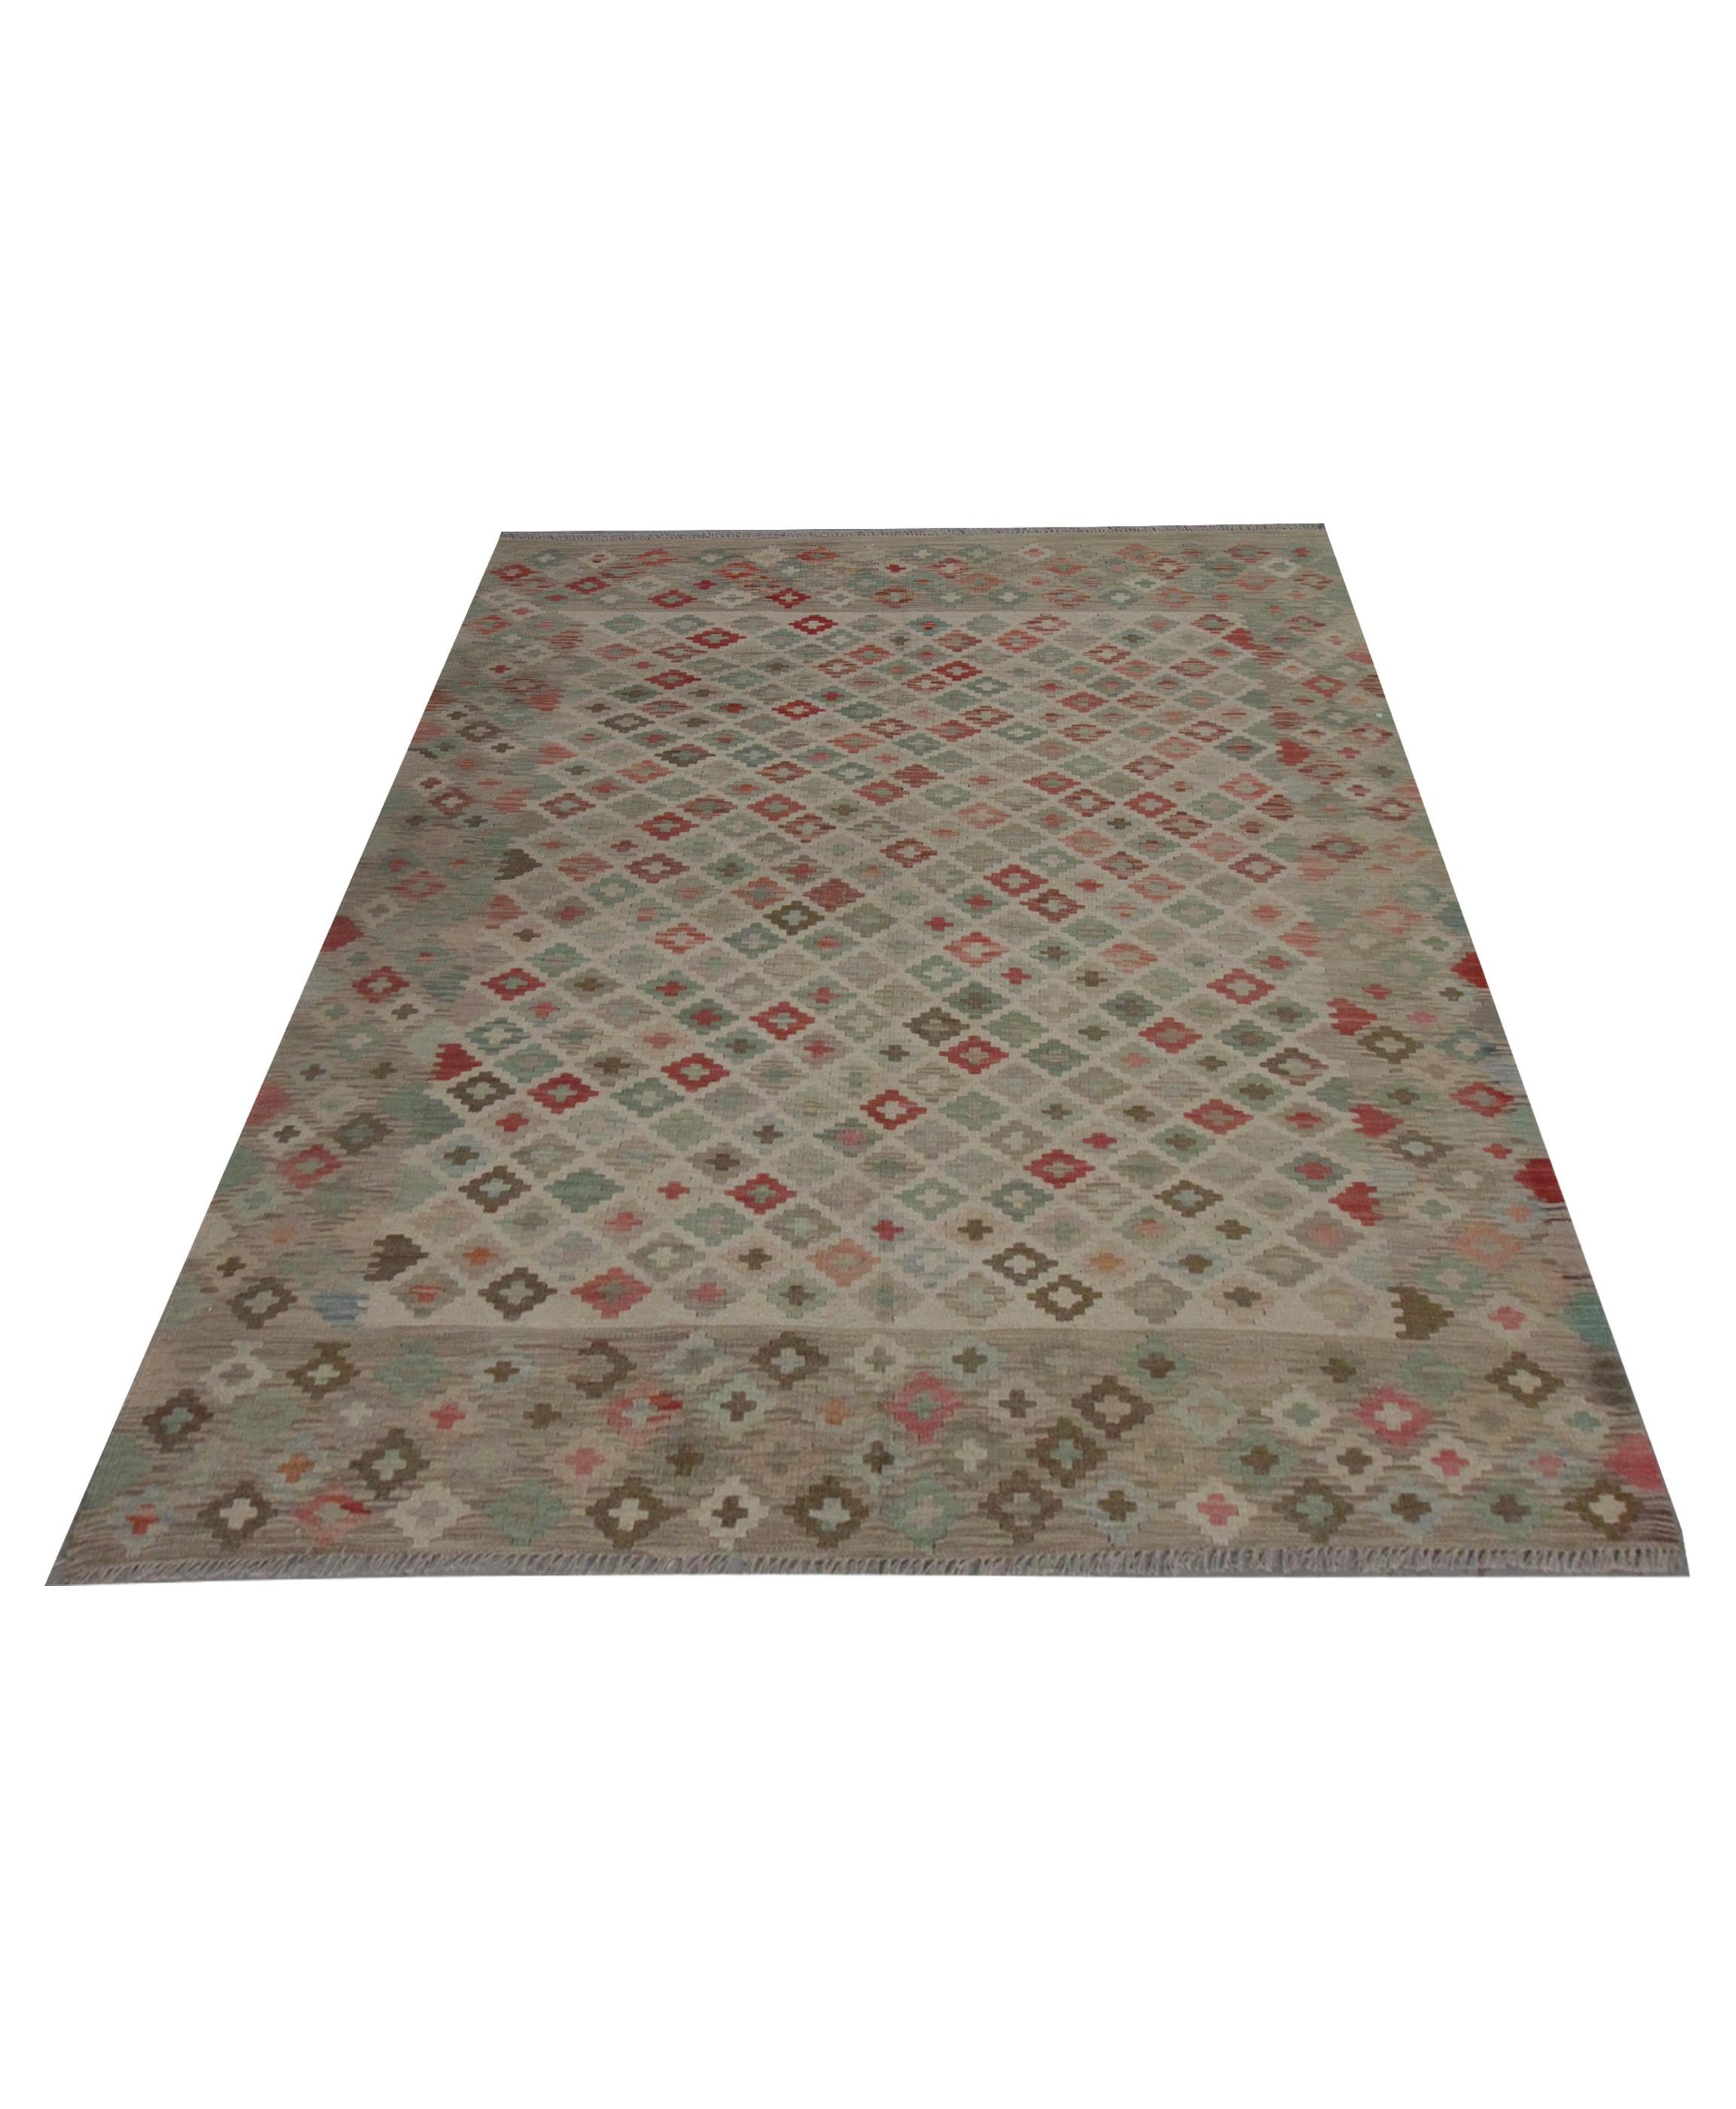 This decorative handwoven grey Kilim rug was constructed in the early 21st century in Afghanistan. The design has been woven with a bold geometric Scandinavian Style in accents of pink, Light brown, and grey on a subtle beige background. This is